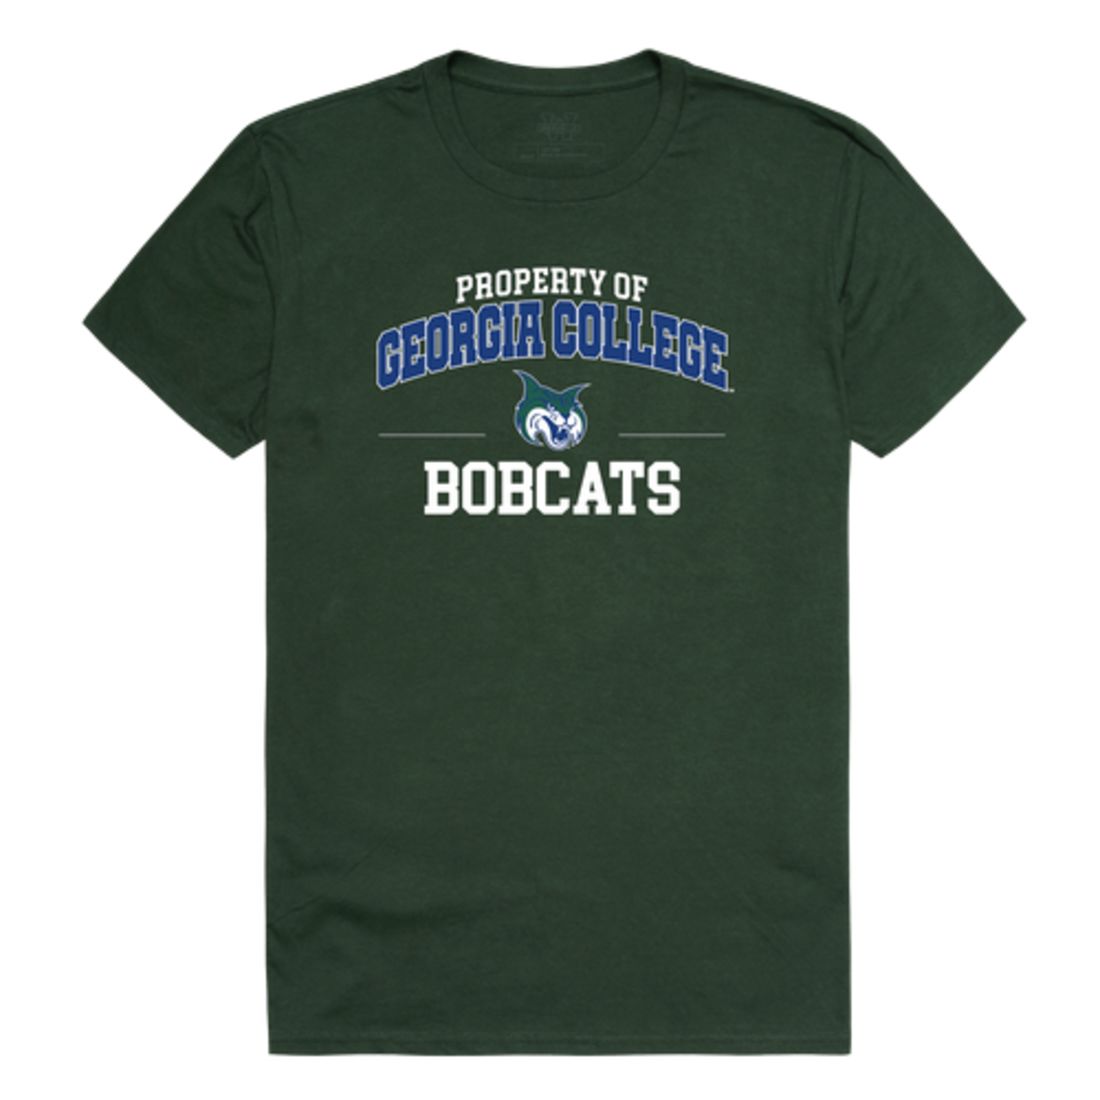 Georgia College and State University Bobcats Property T-Shirt Tee